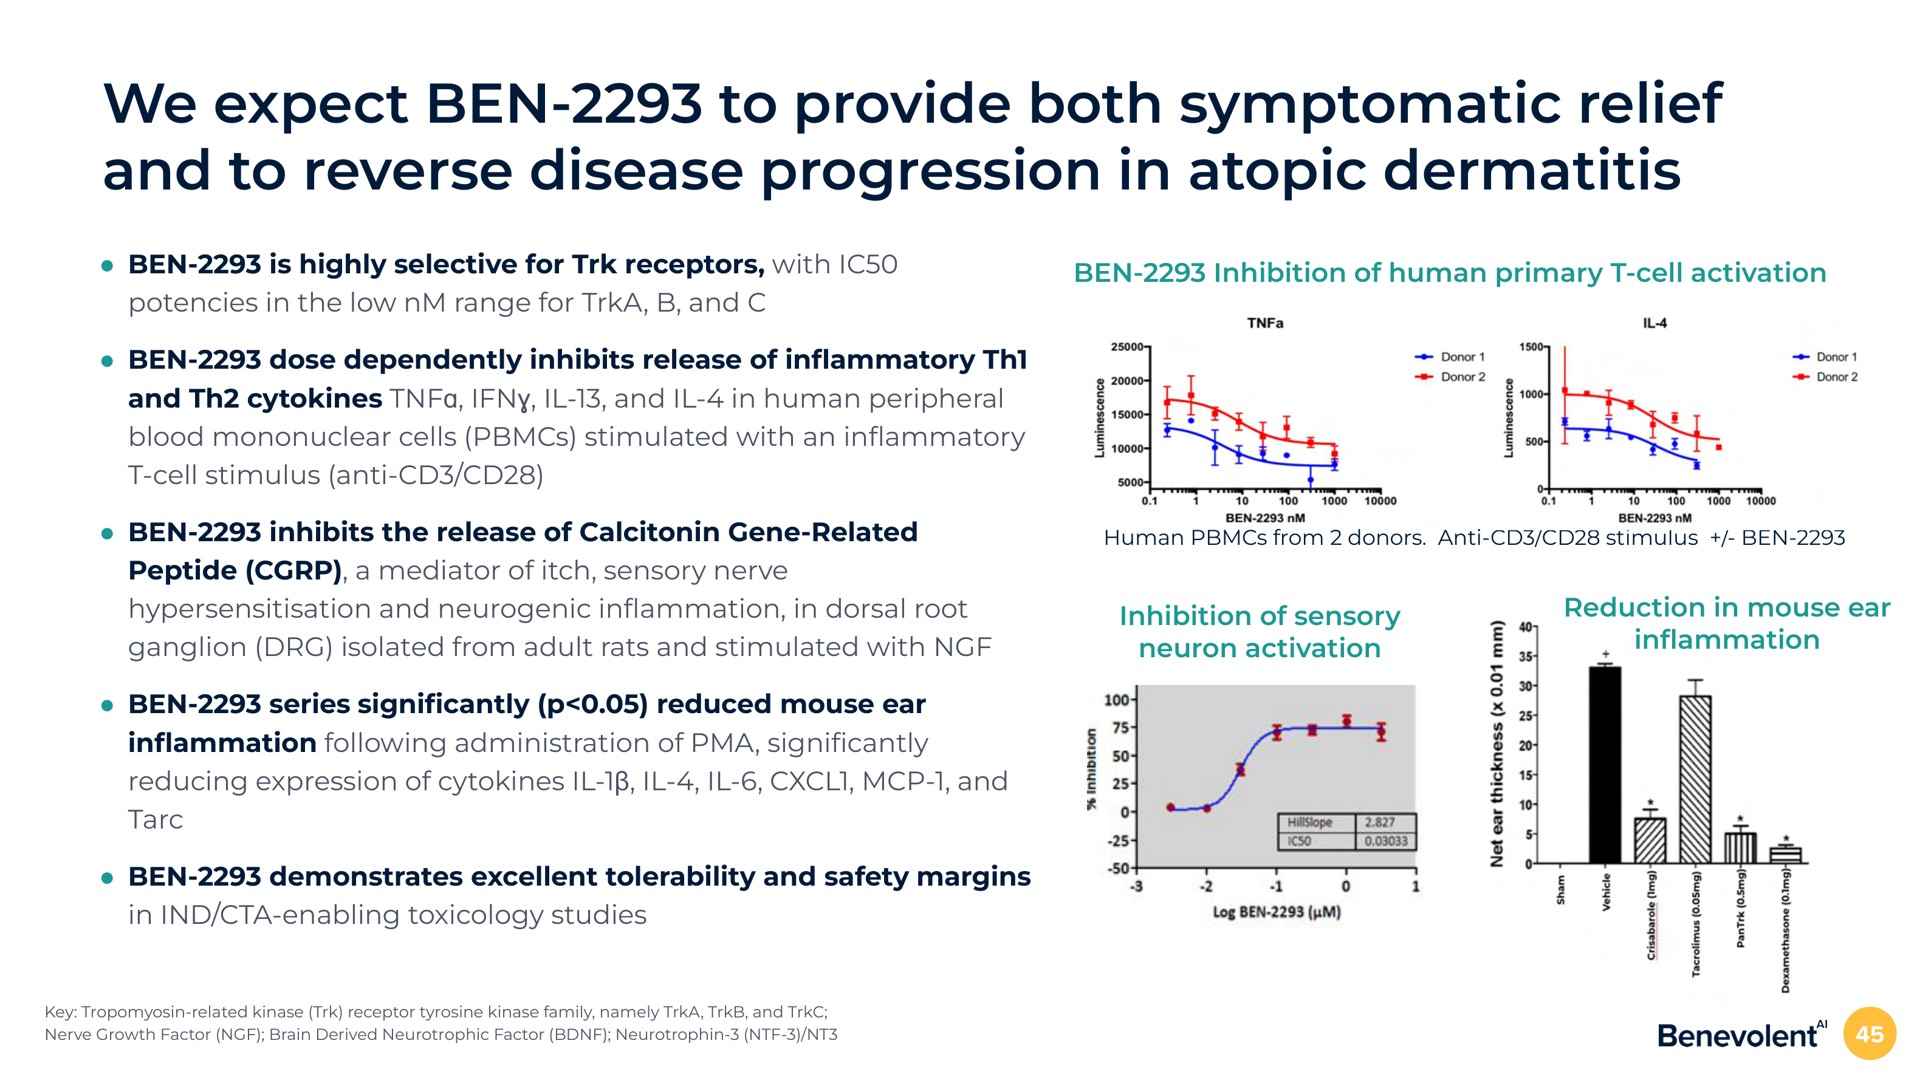 we expect ben to provide both symptomatic relief and to reverse disease progression in atopic dermatitis ben is highly selective for receptors with potencies in the low range for and ben dose dependently inhibits release of in and and in human peripheral blood mononuclear cells stimulated with an in cell stimulus anti ben inhibition of human primary cell activation ben inhibits the release of gene related peptide a mediator of itch sensory nerve and neurogenic in in dorsal root ganglion isolated from adult rats and stimulated with ben series reduced mouse ear in following administration of reducing expression of and ben demonstrates excellent tolerability and safety margins in enabling toxicology studies inhibition of sensory neuron activation reduction in mouse ear in | BenevolentAI